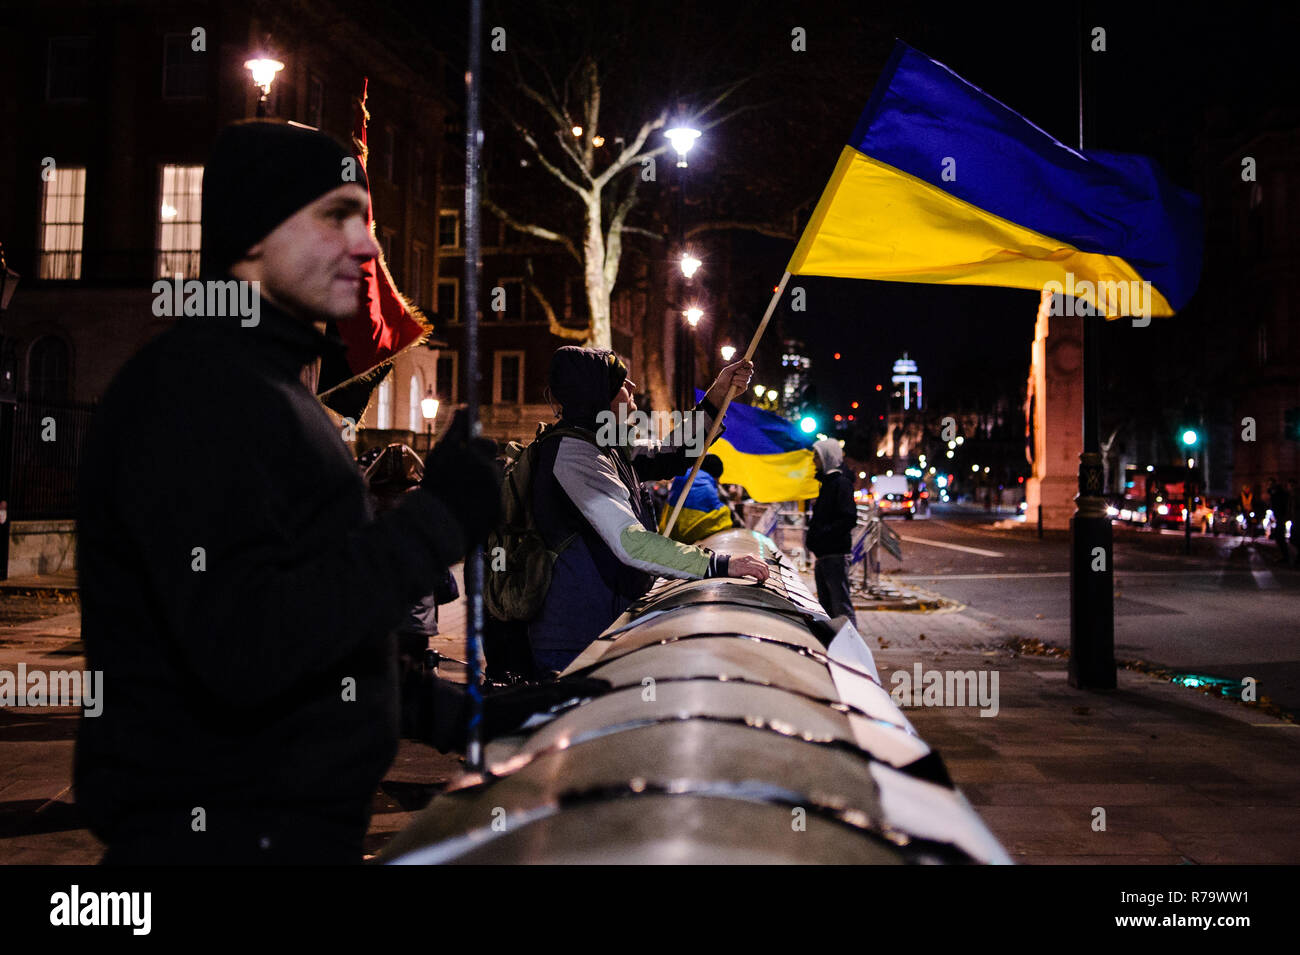 A protester seen holding a flag during the demonstration. Ukrainian expats held an anti-Putin demonstration opposite Downing Street on Whitehall in central London. Tensions between Ukraine and Russia have reached a new height in recent weeks with the Russian seizure of three Ukrainian naval vessels, prompting Ukraine to declare martial law in several border regions. Stock Photo